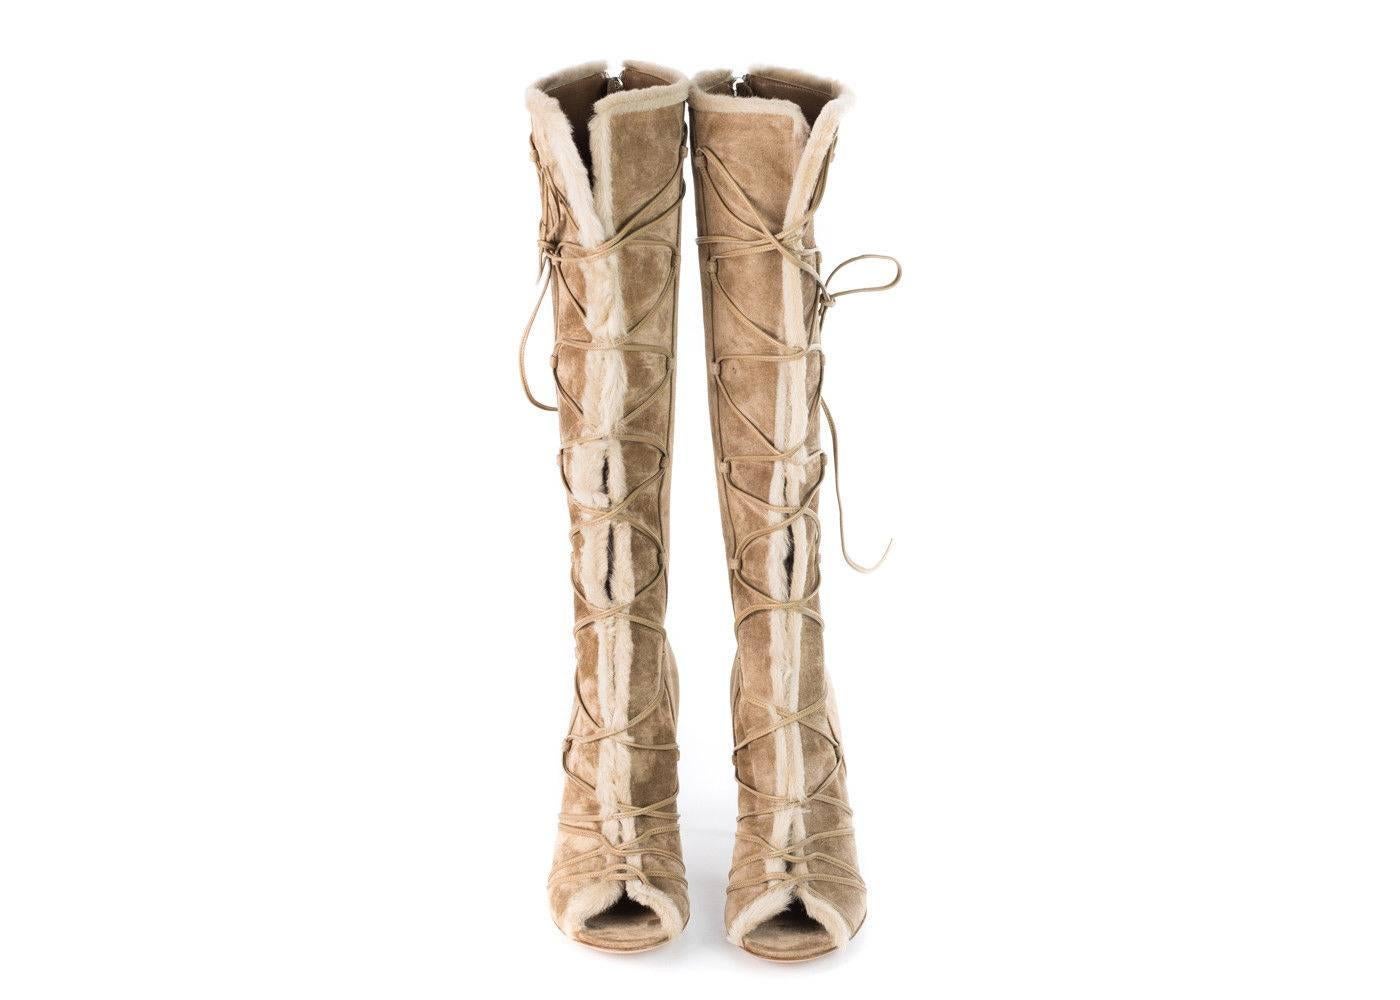 Gianvito Rossi Suede Shearling Trimmed 
 Knee High Lace Up Boots
Retails In-Store & Online for $1,649
New Without Box
Size IT 39.5 / US 9.5

Meet the sleekest shearling trimmed boot! Featuring a lux suede finish. Combined this silhouette with pants